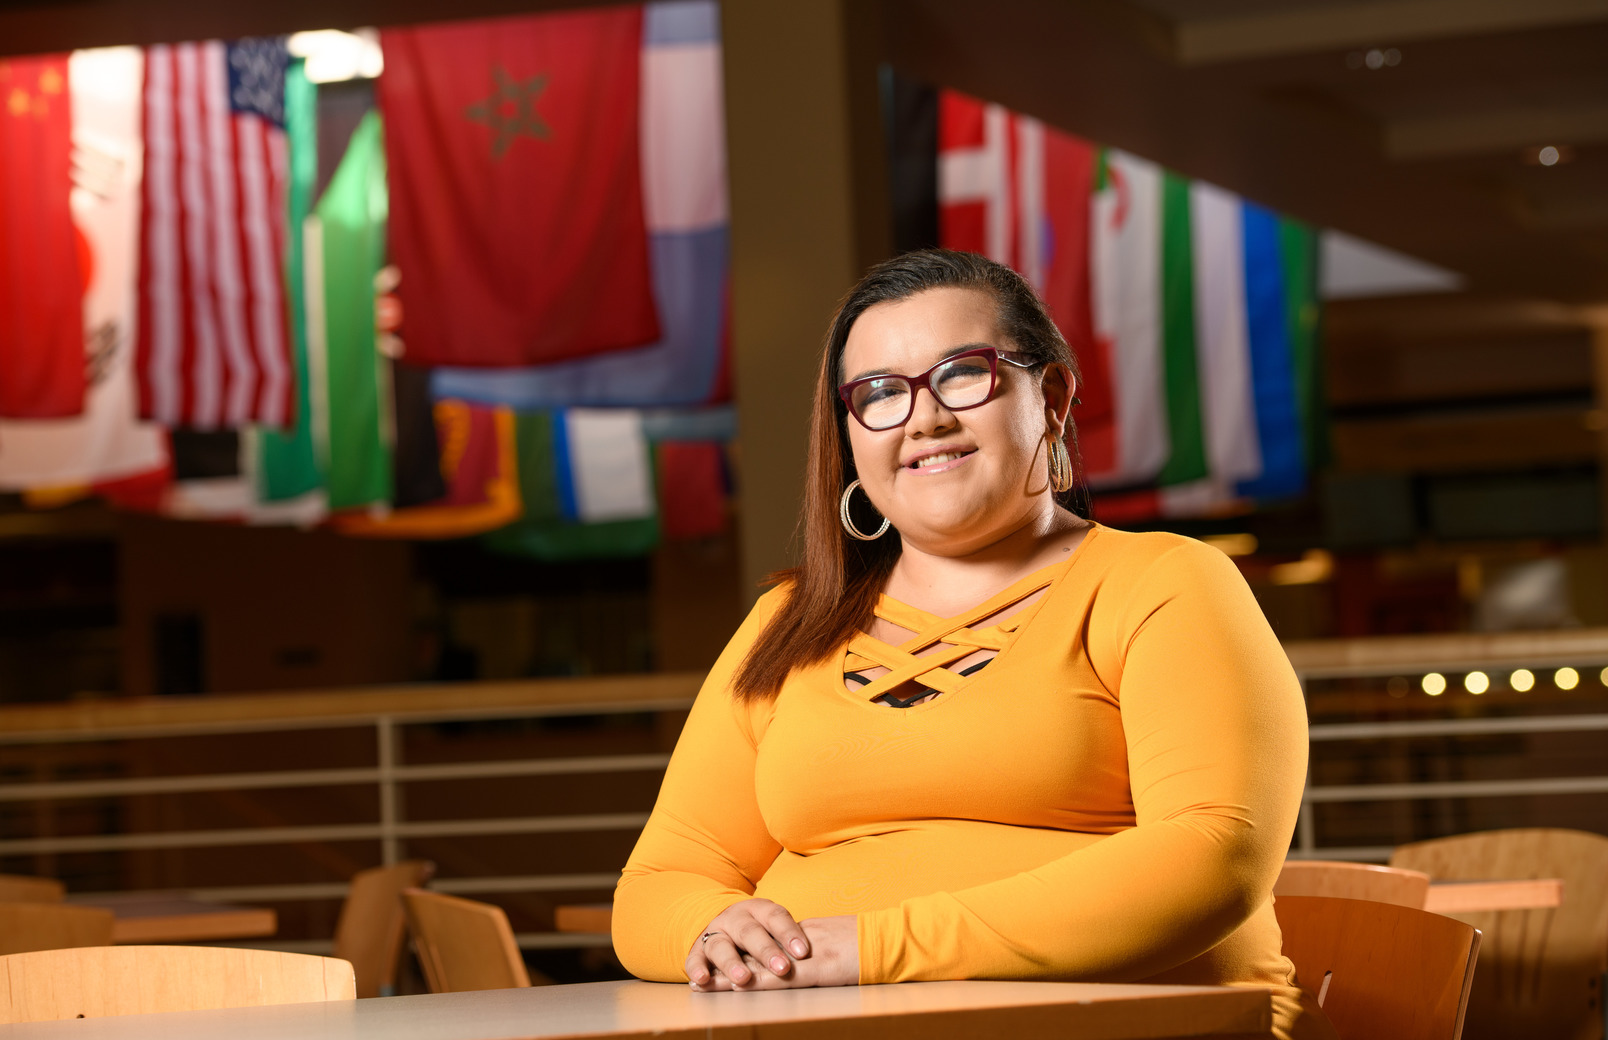 A student in a yellow shirt sits among international flags in the Wyo Union.